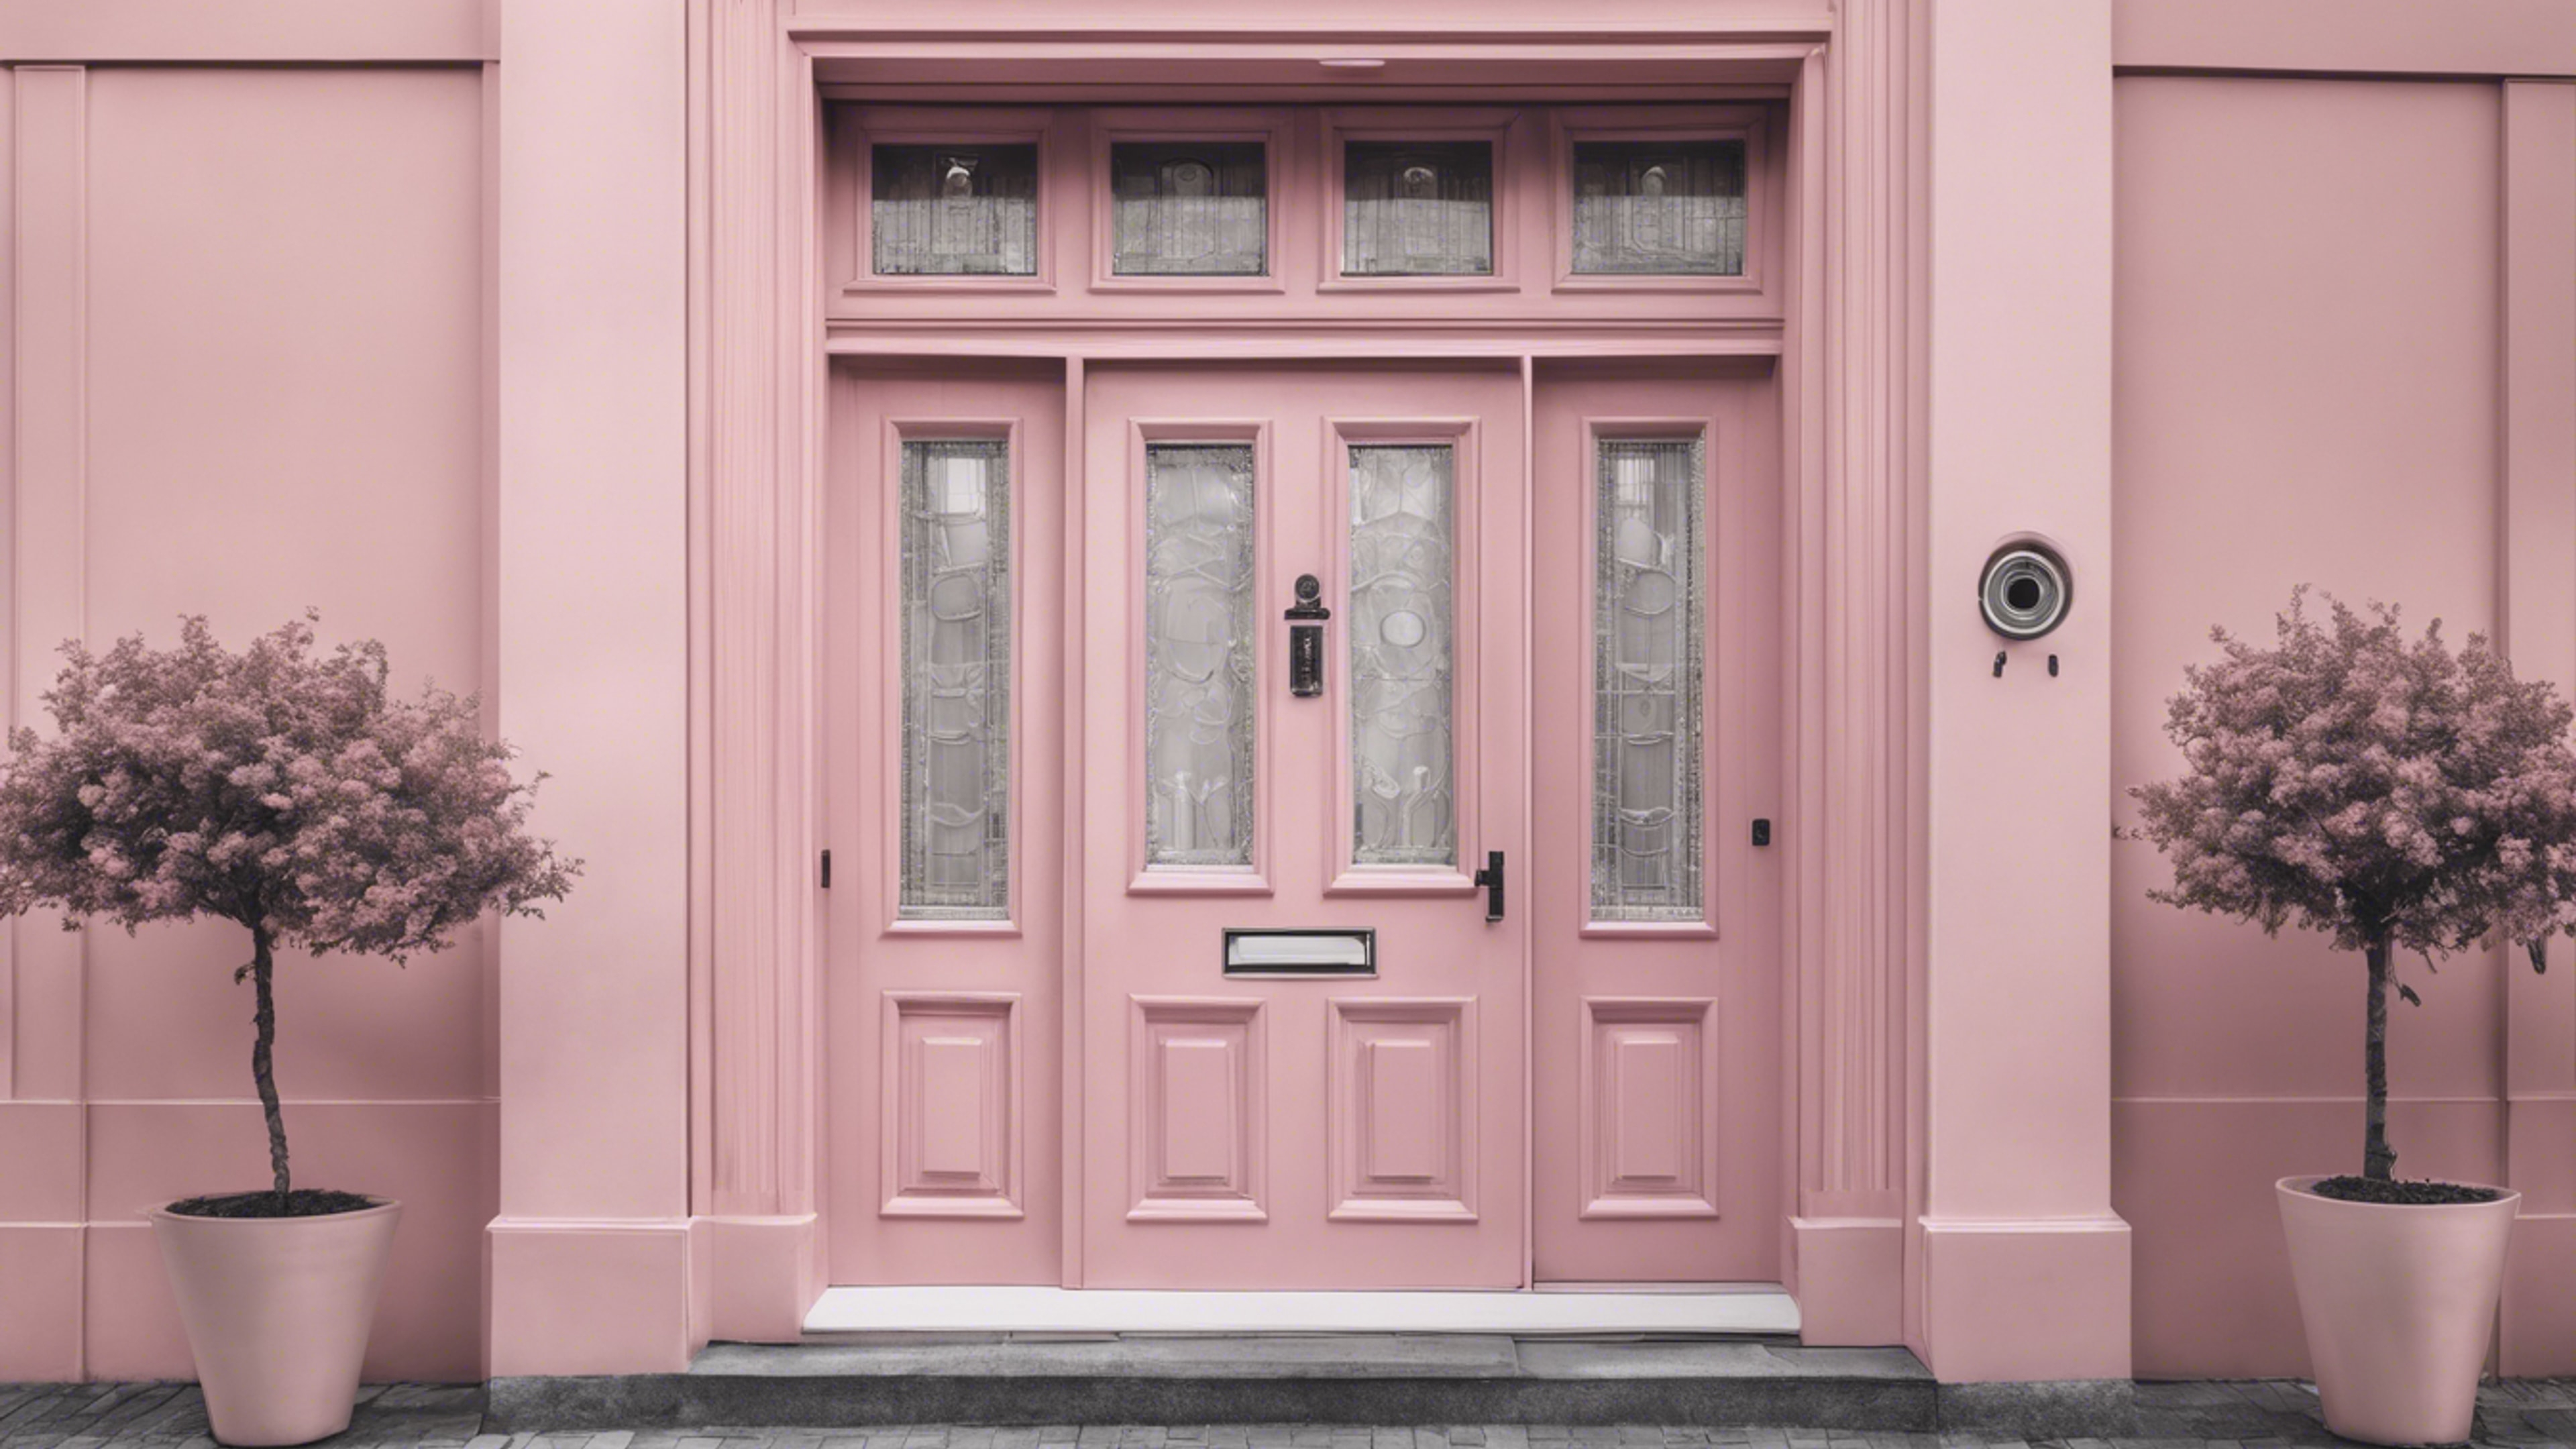 Monochrome image of a sophisticated townhouse door painted in a fetching preppy pastel pink. Wallpaper[a9cdce63c1c94c029691]